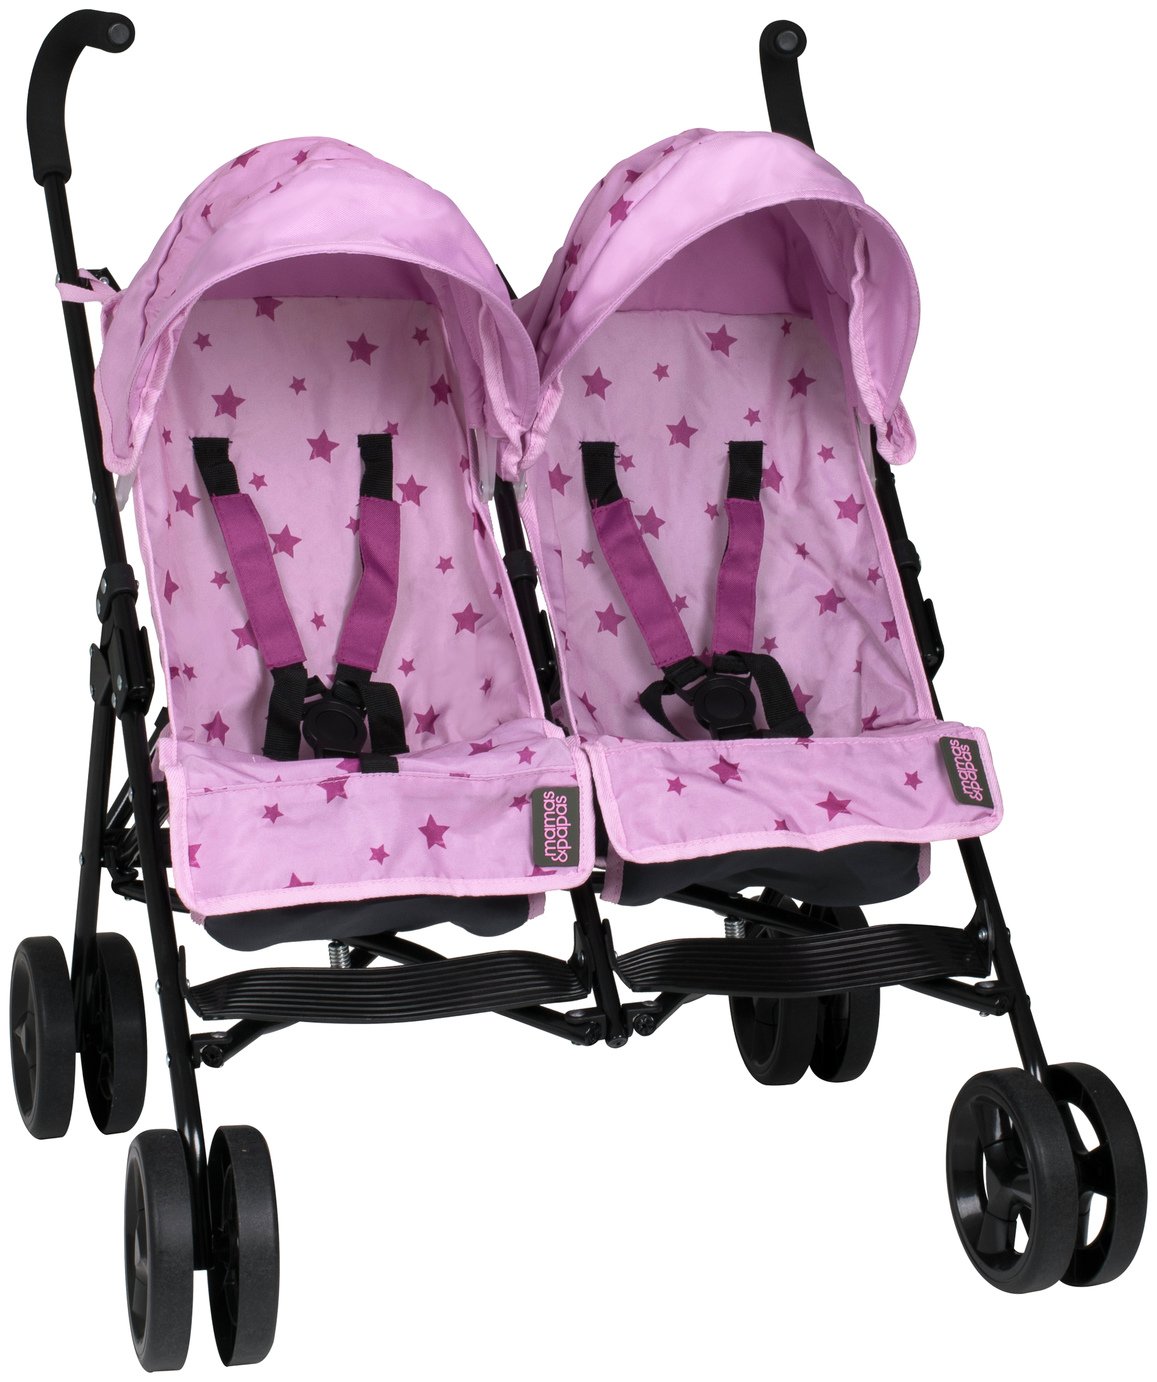 kids toy double buggy